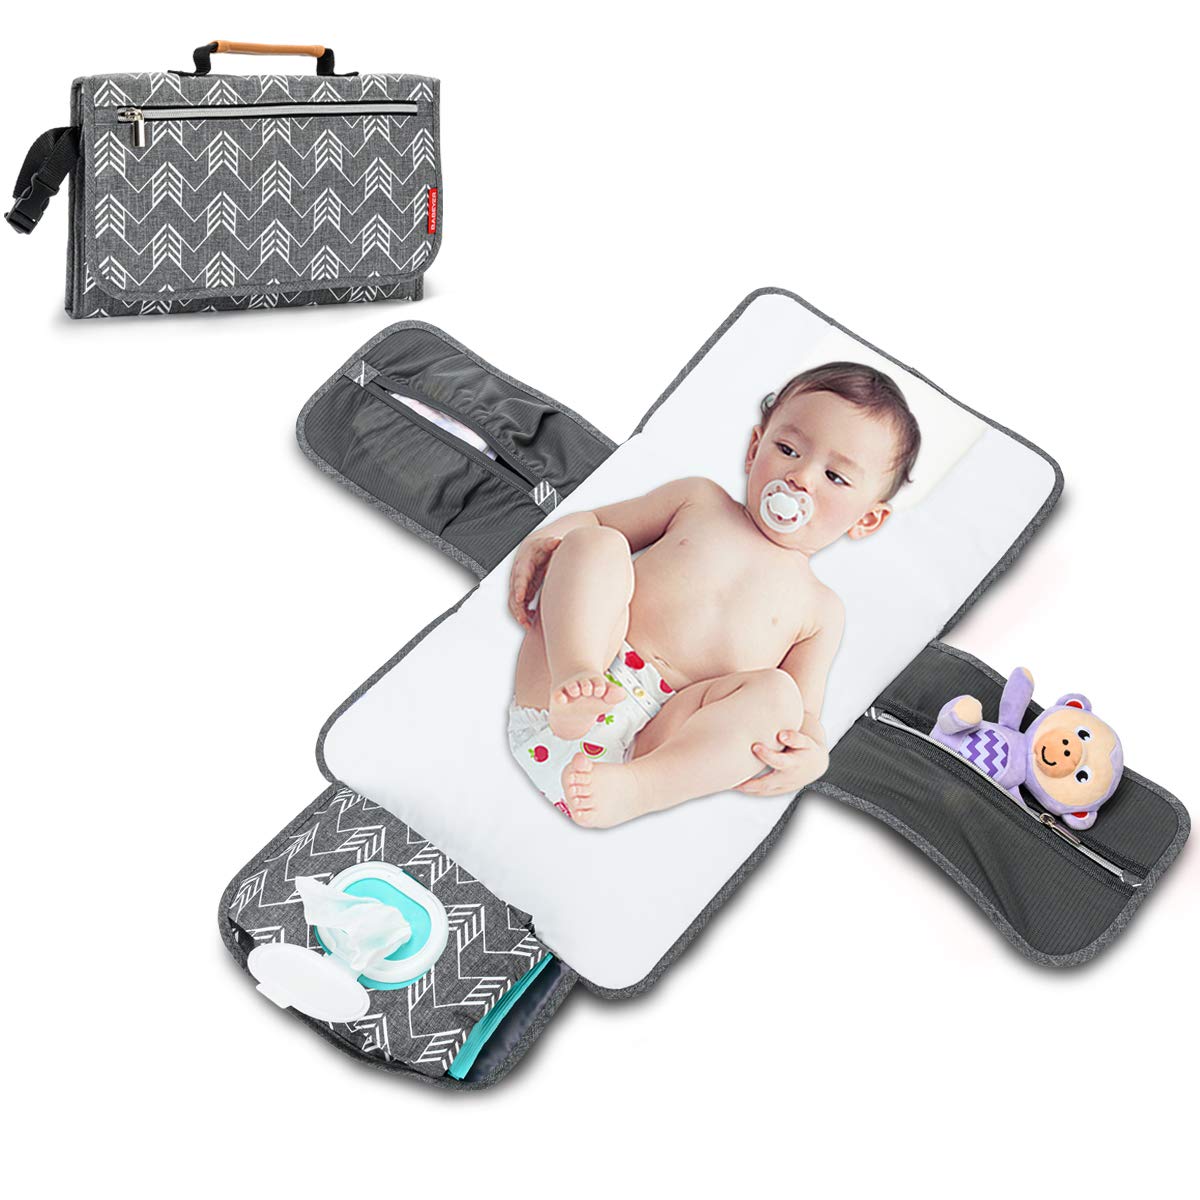 BABEYER Portable Nappy Changing Mat, Baby Travel Changing Mat with Storage Pockets for Toddlers Infants & Newborns, Grey